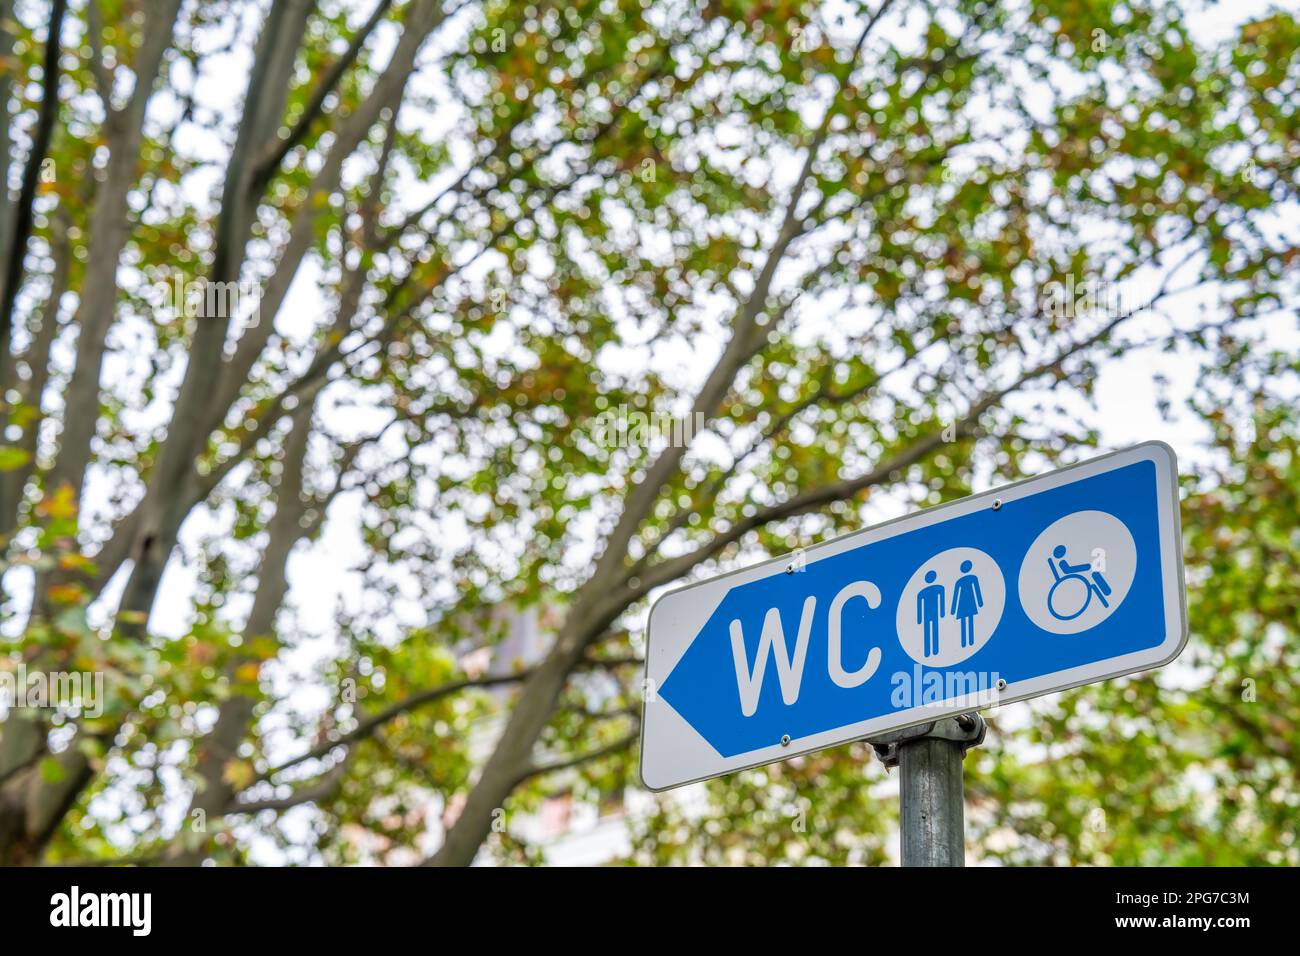 A WC sign in the city, trees in the background. Stock Photo